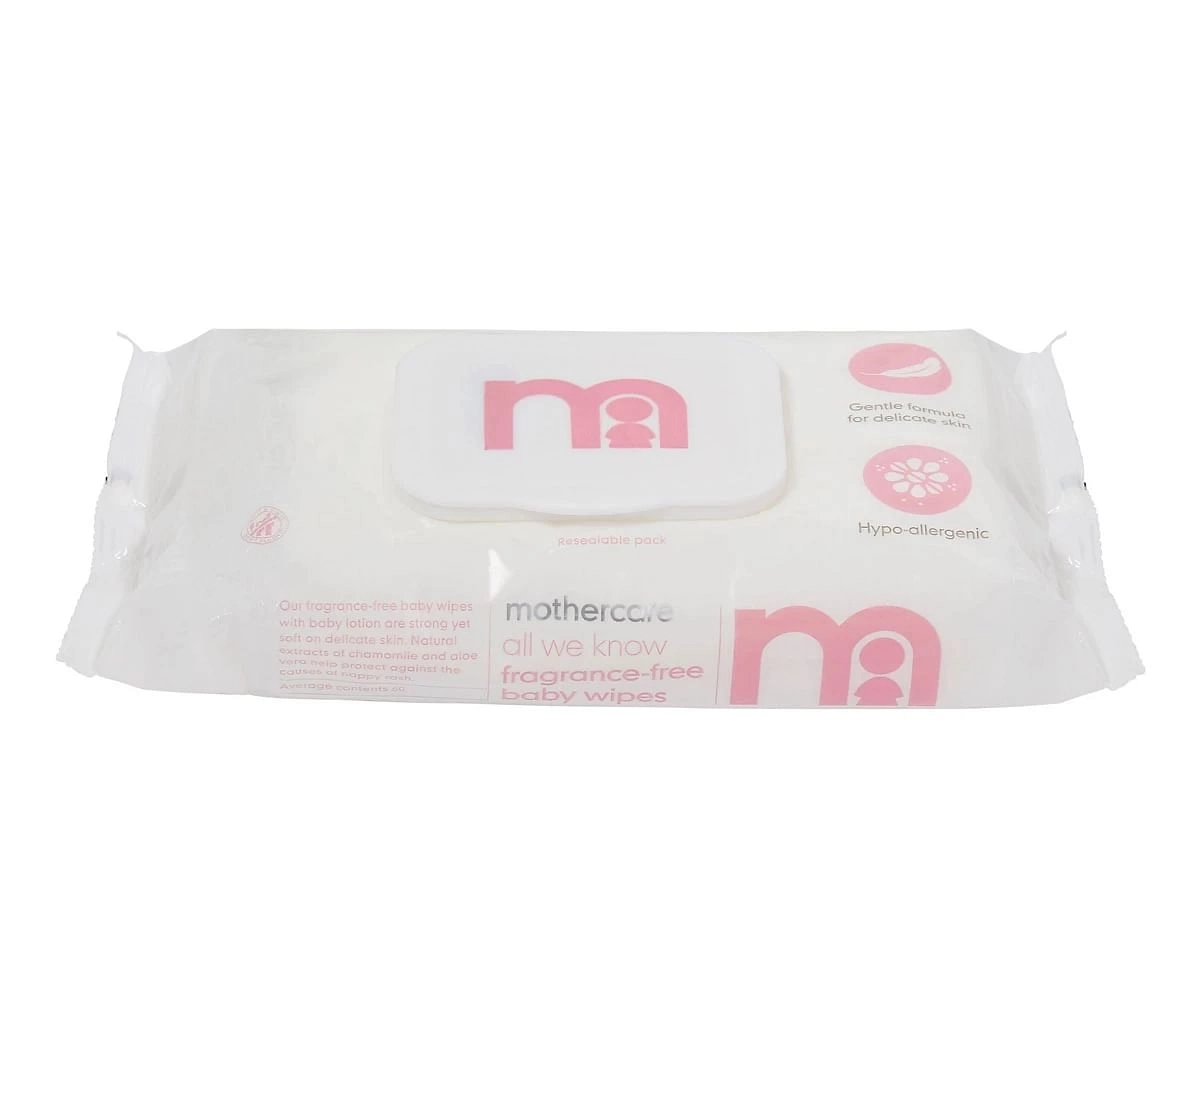 Mothercare All We Know Non-Fragranced Baby Wipes Pack Of 60